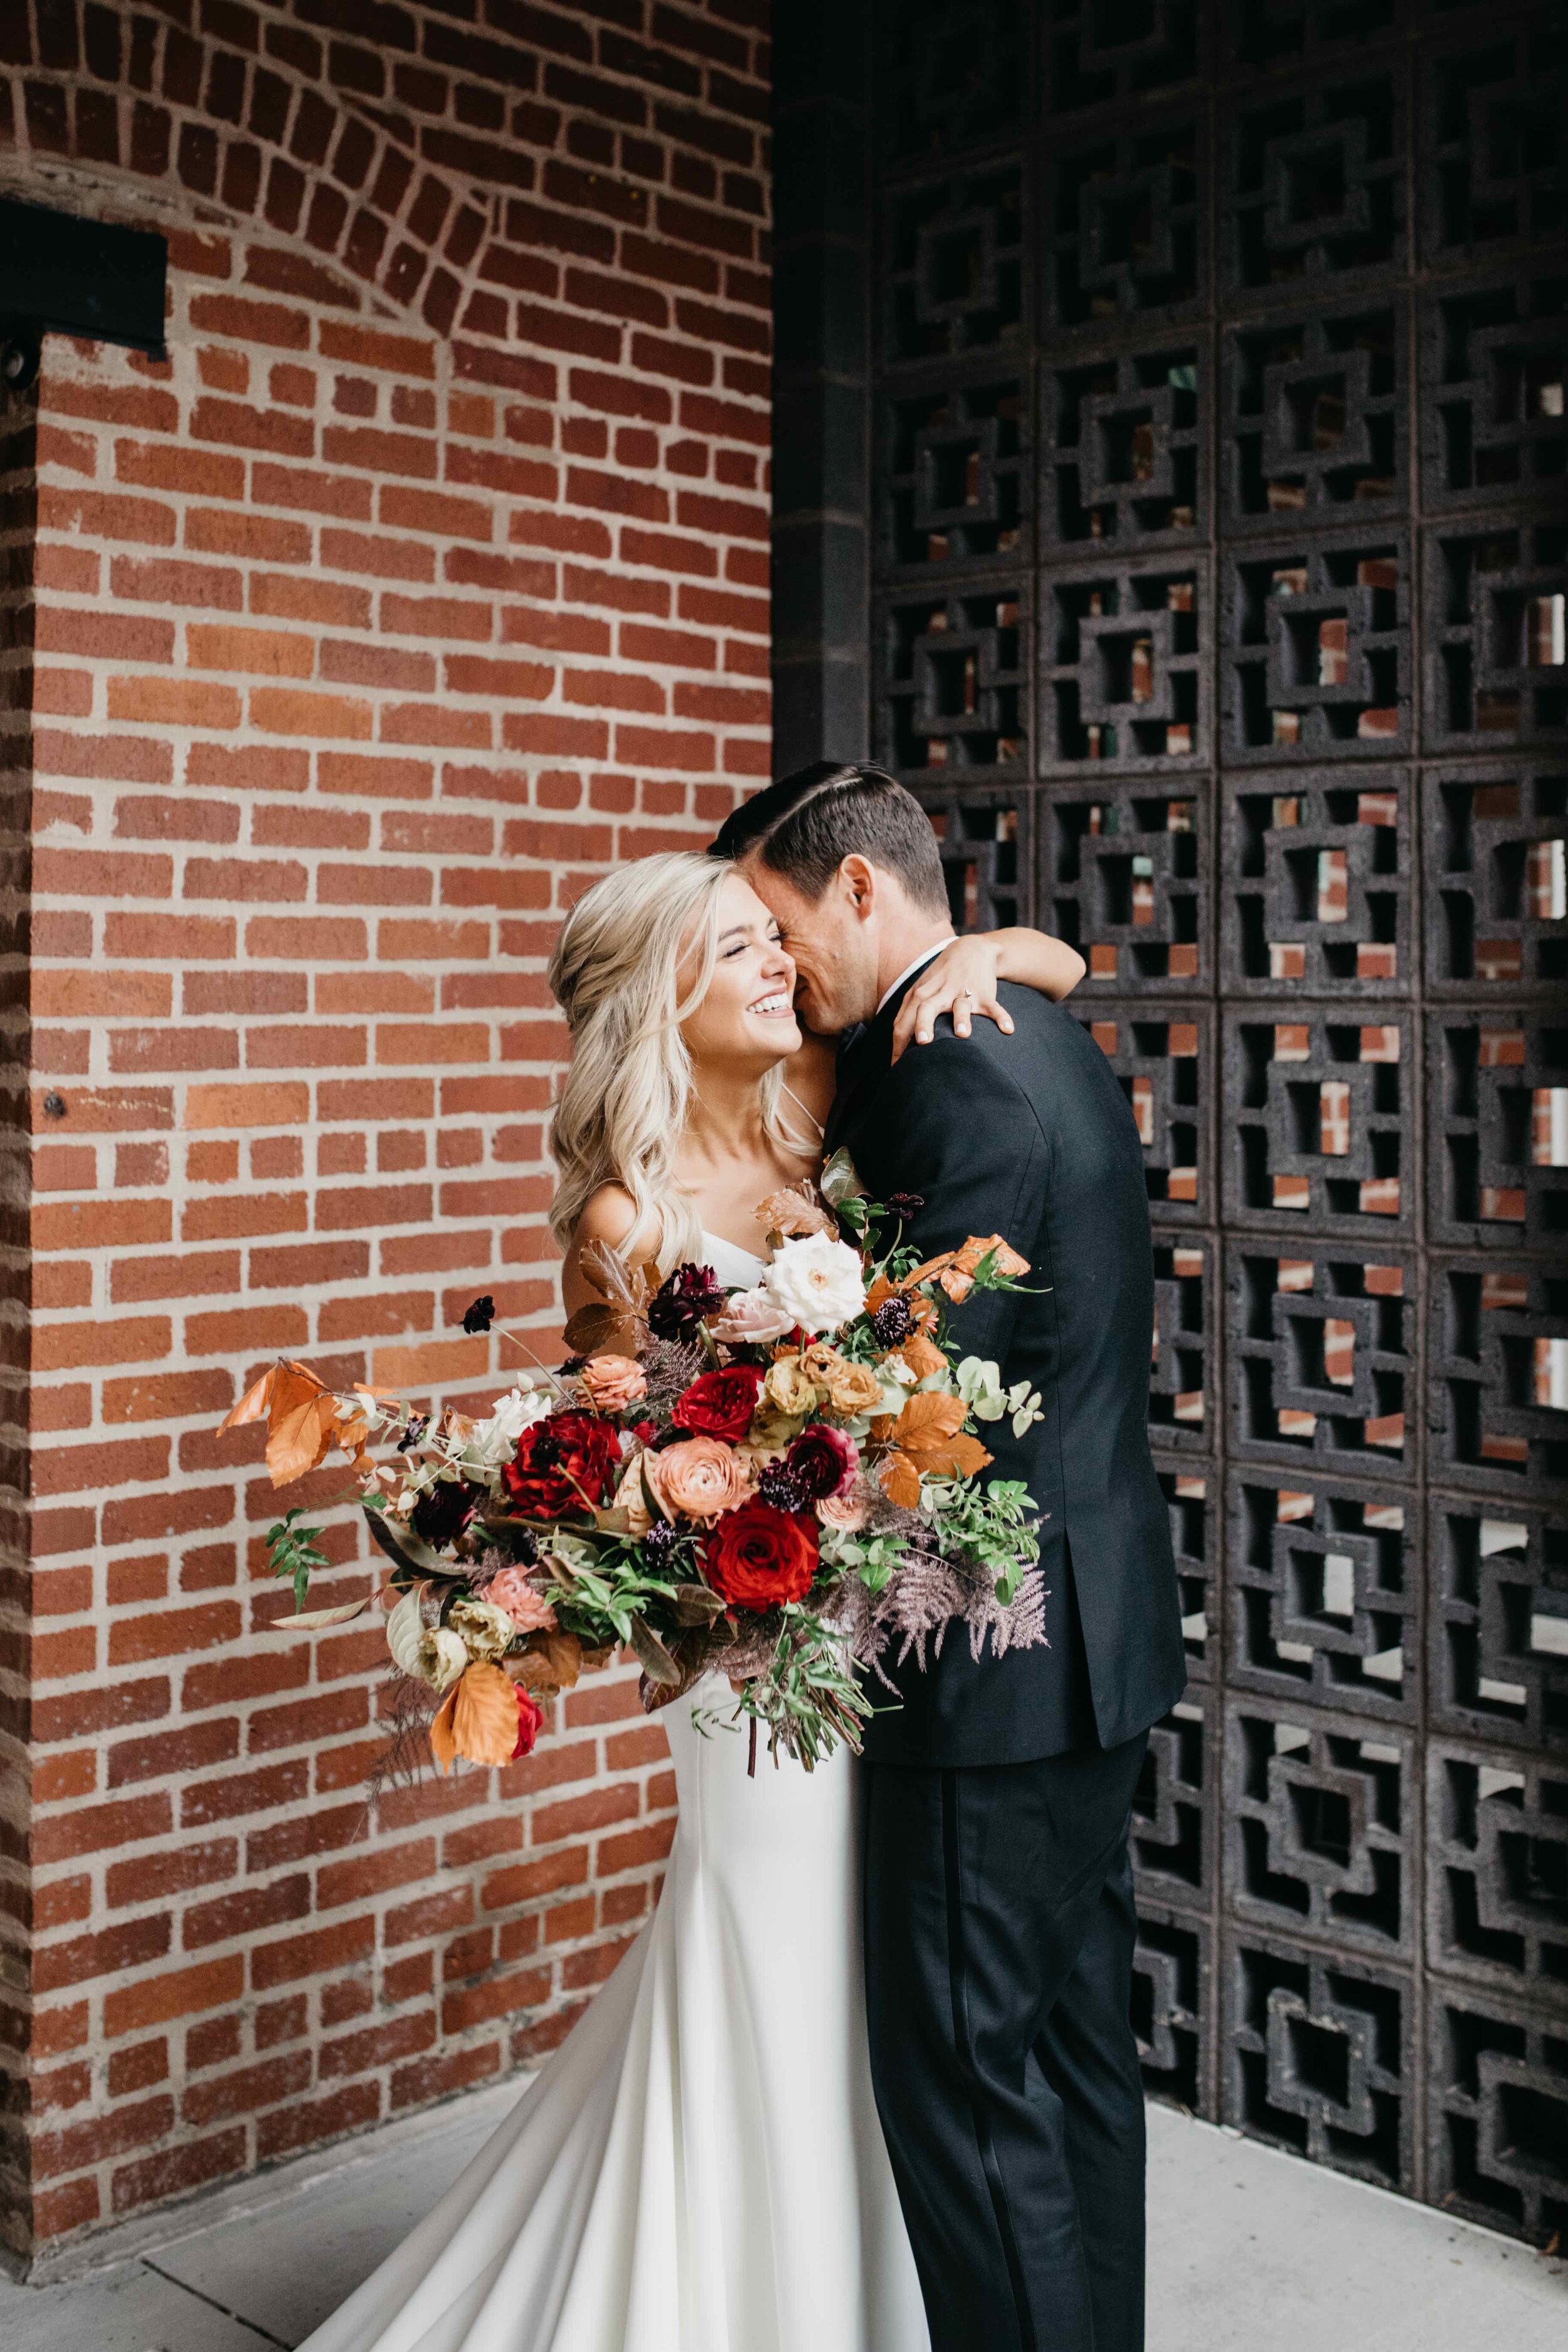 Garden inspired organic bridal bouquet in rich fall color palette using deep red garden roses, eggplant ranunculus, chocolate cosmos, copper beech, dusty rose ranunculus, and natural greenery. Luxury wedding florist in Nashville, TN.